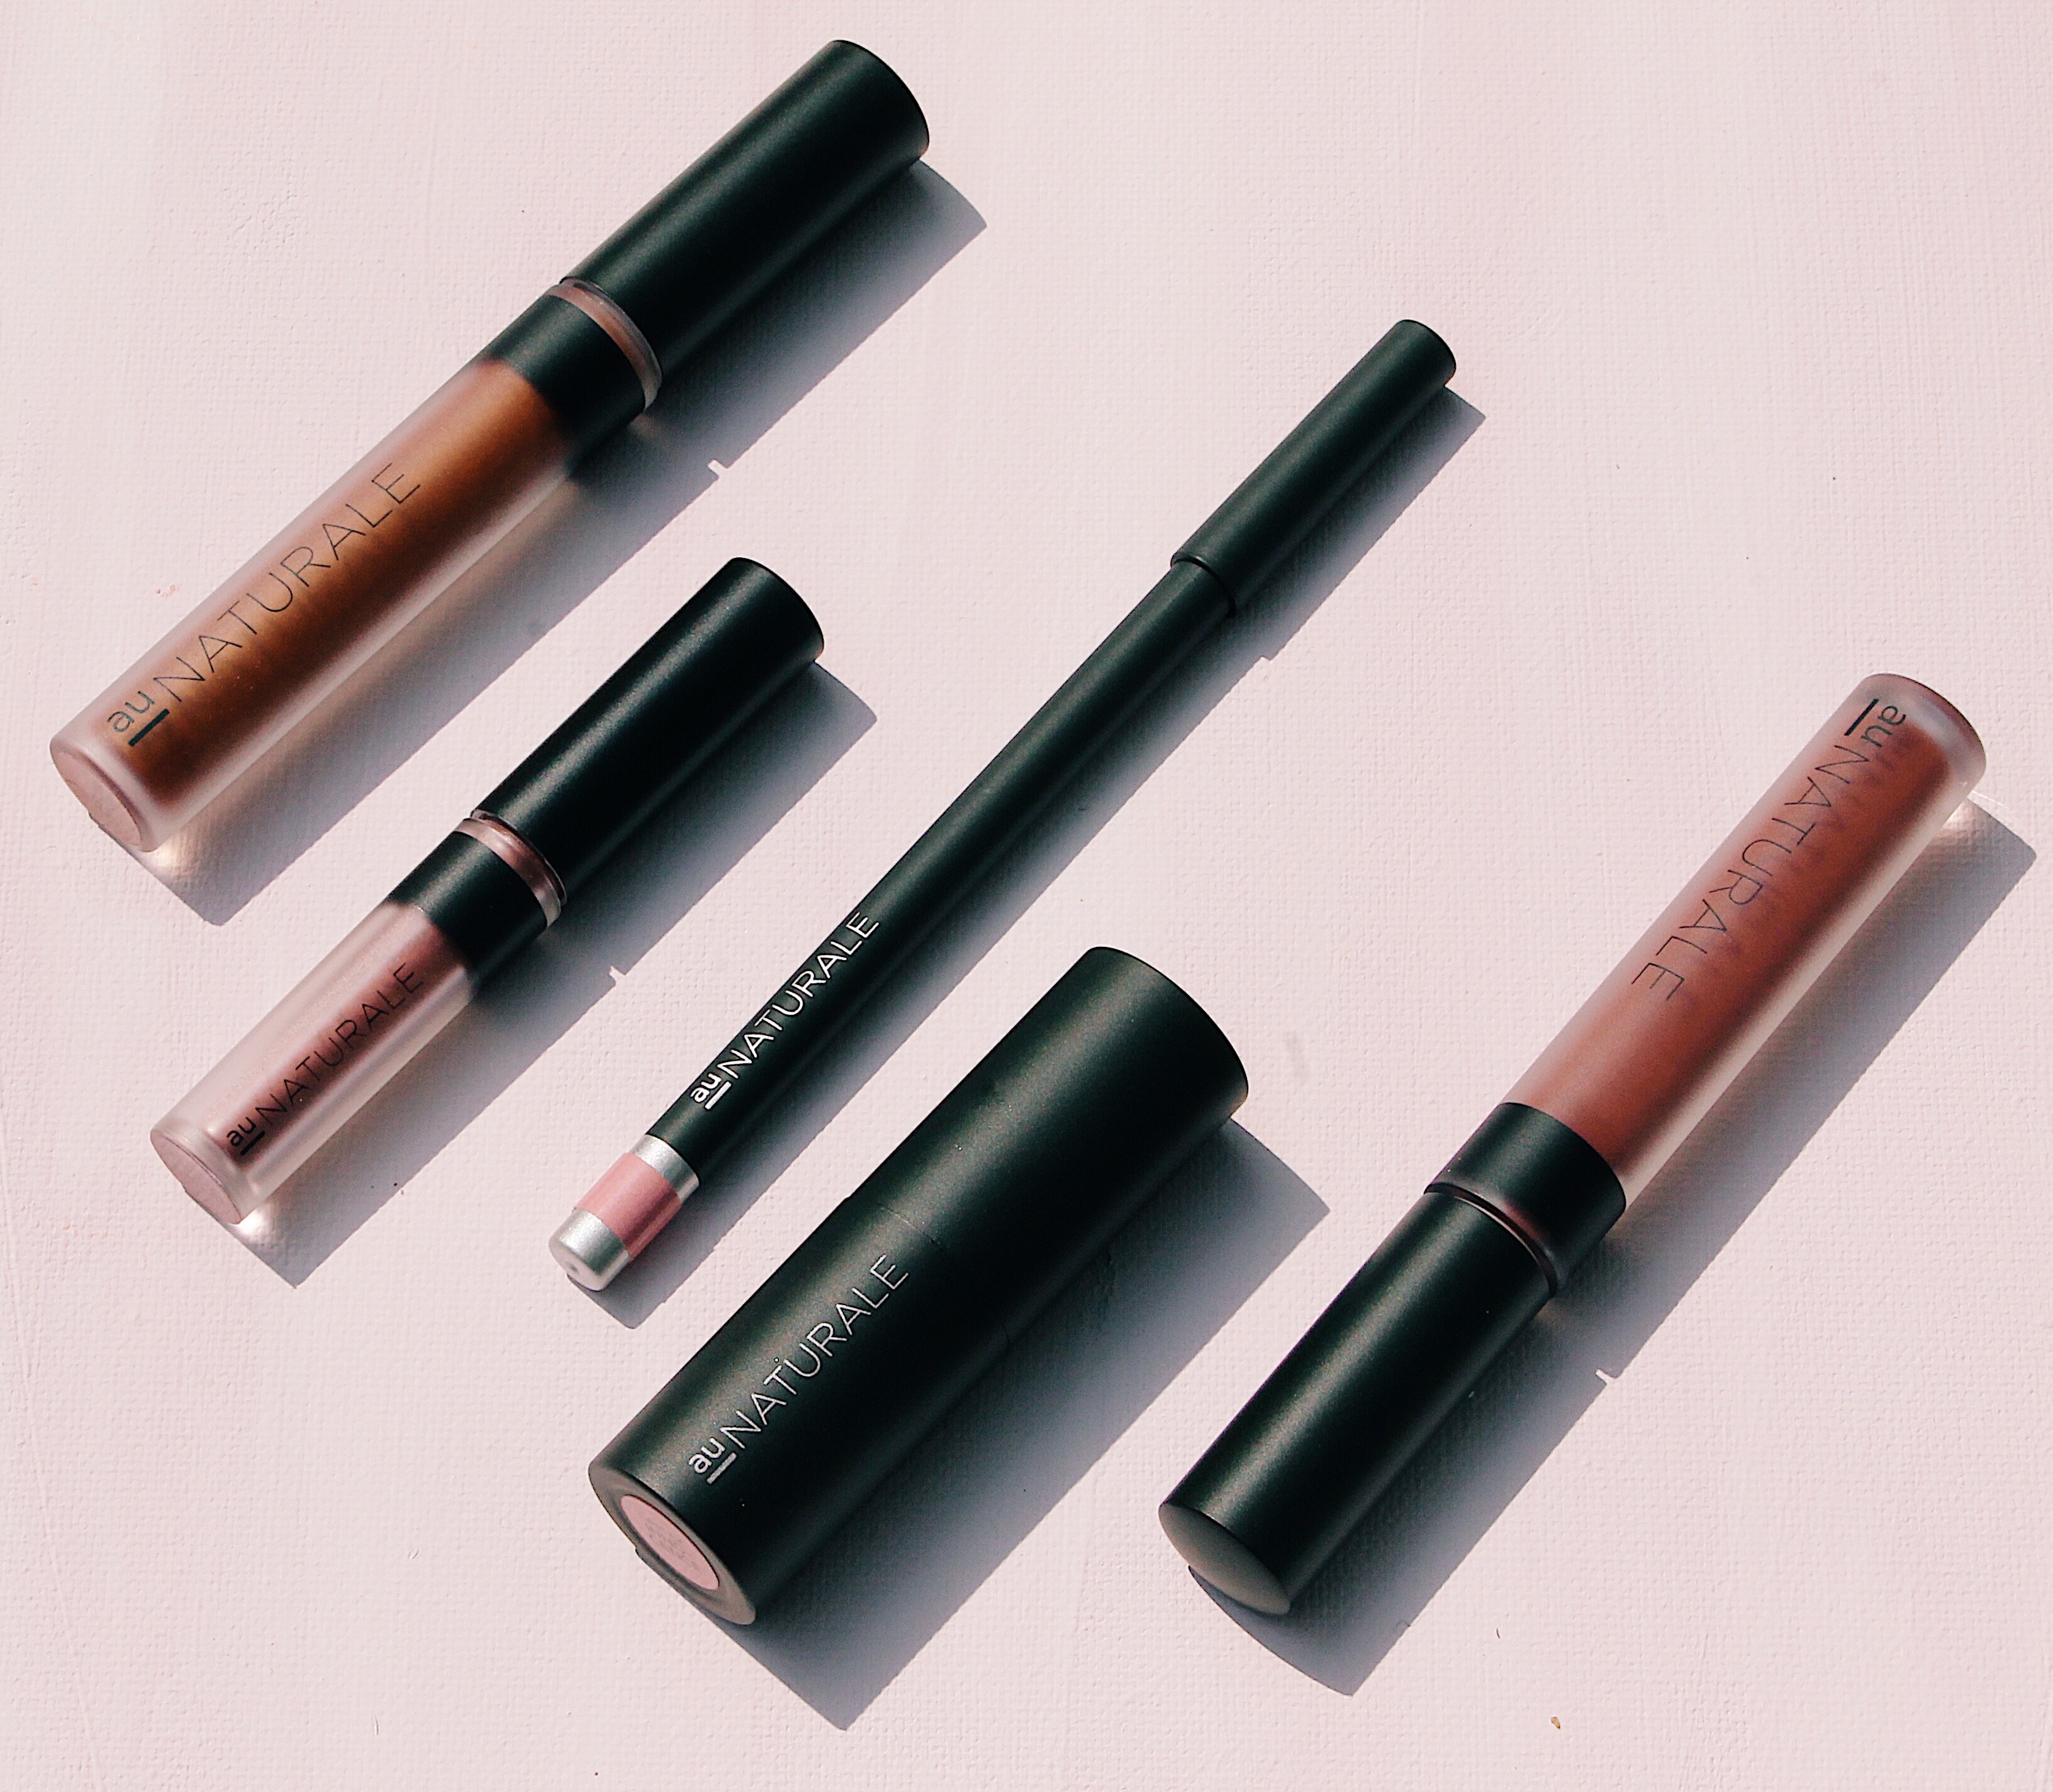 Au naturale clean lipstick, lipliner, and lipgloss